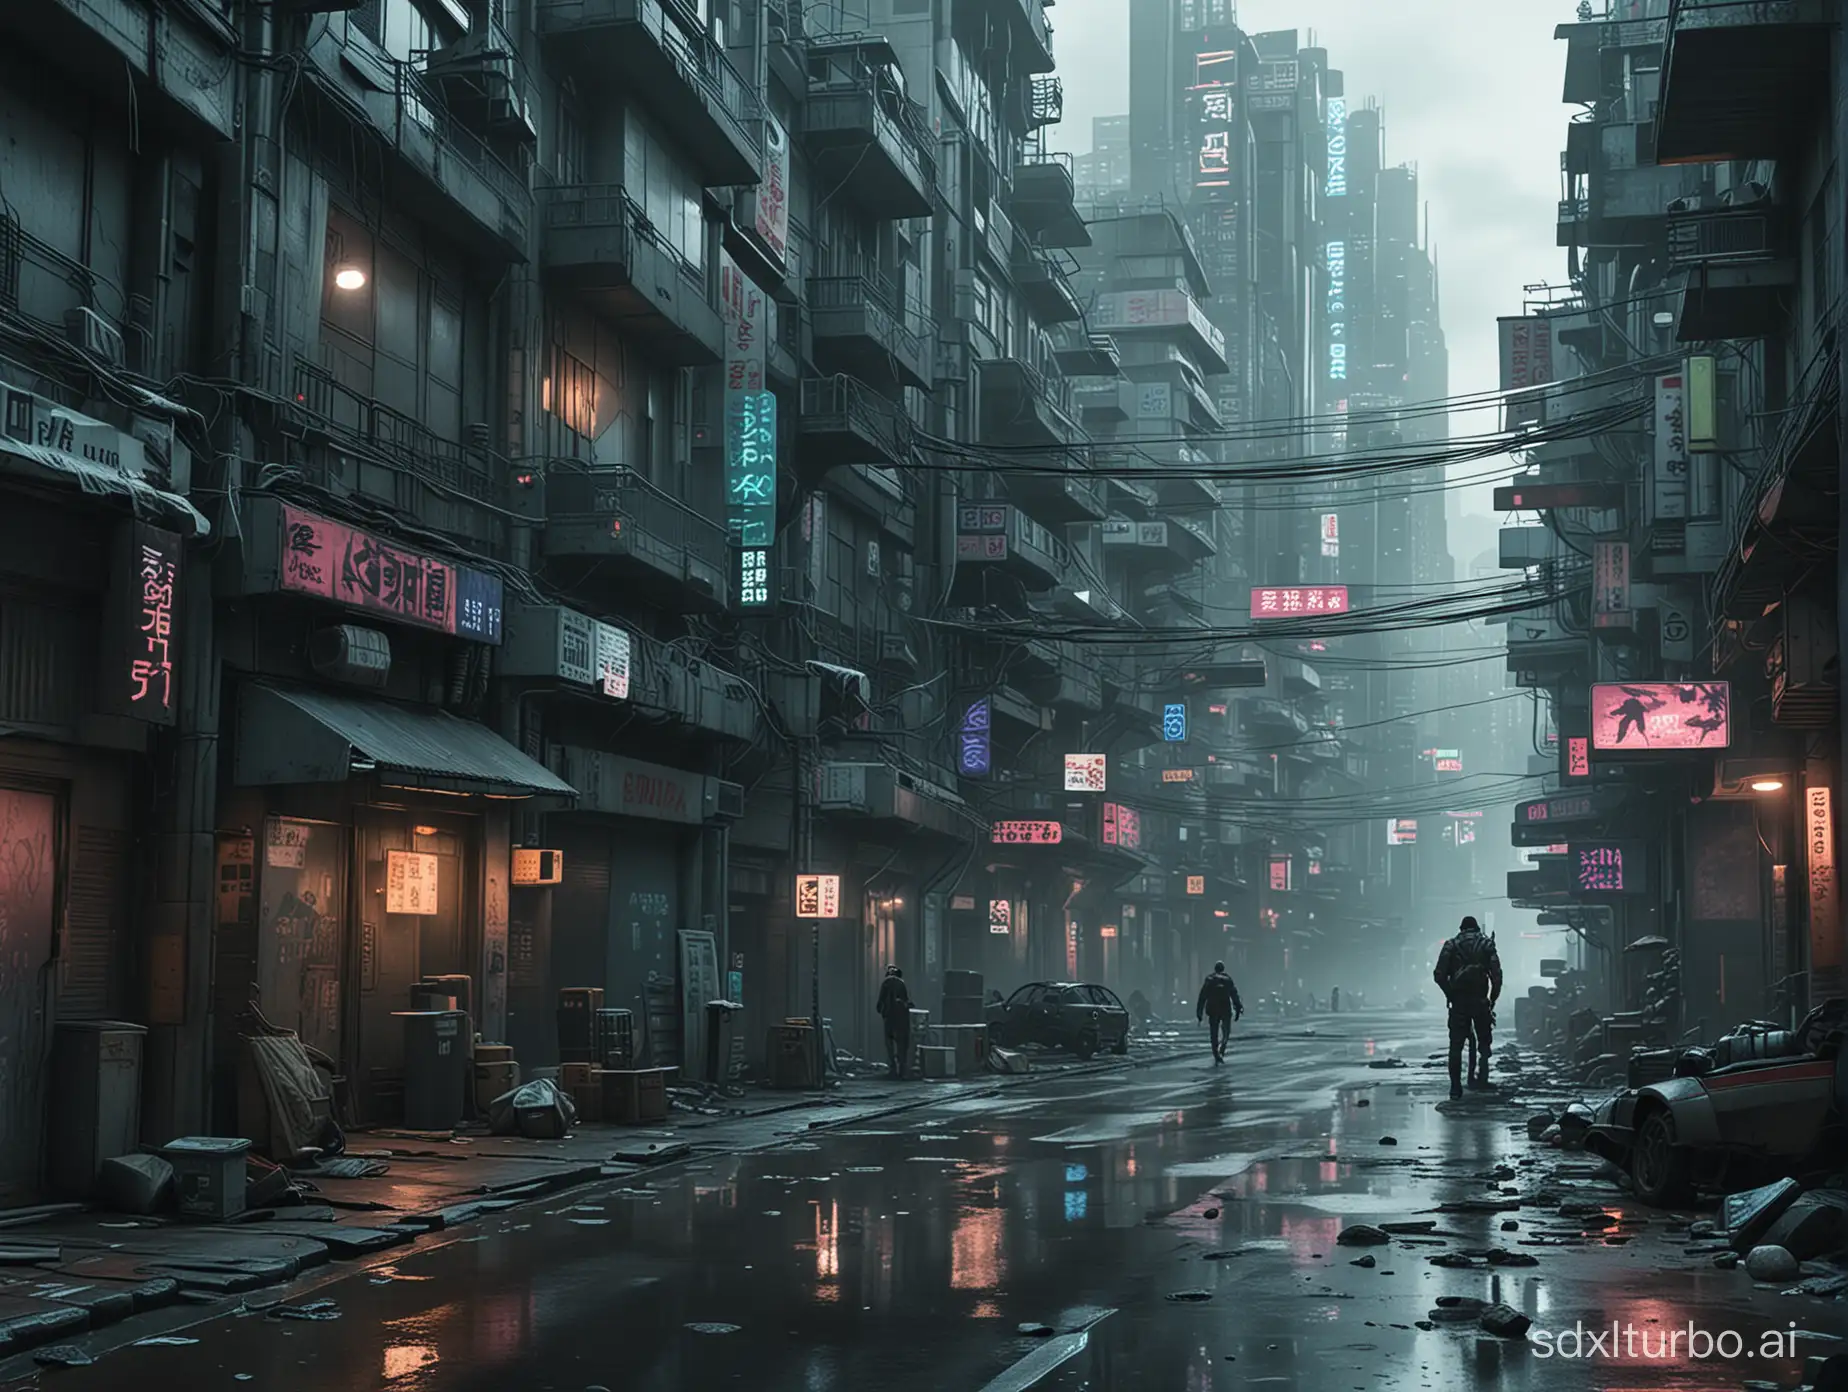 The streets of cyberpunk filled with a sense of crisis.